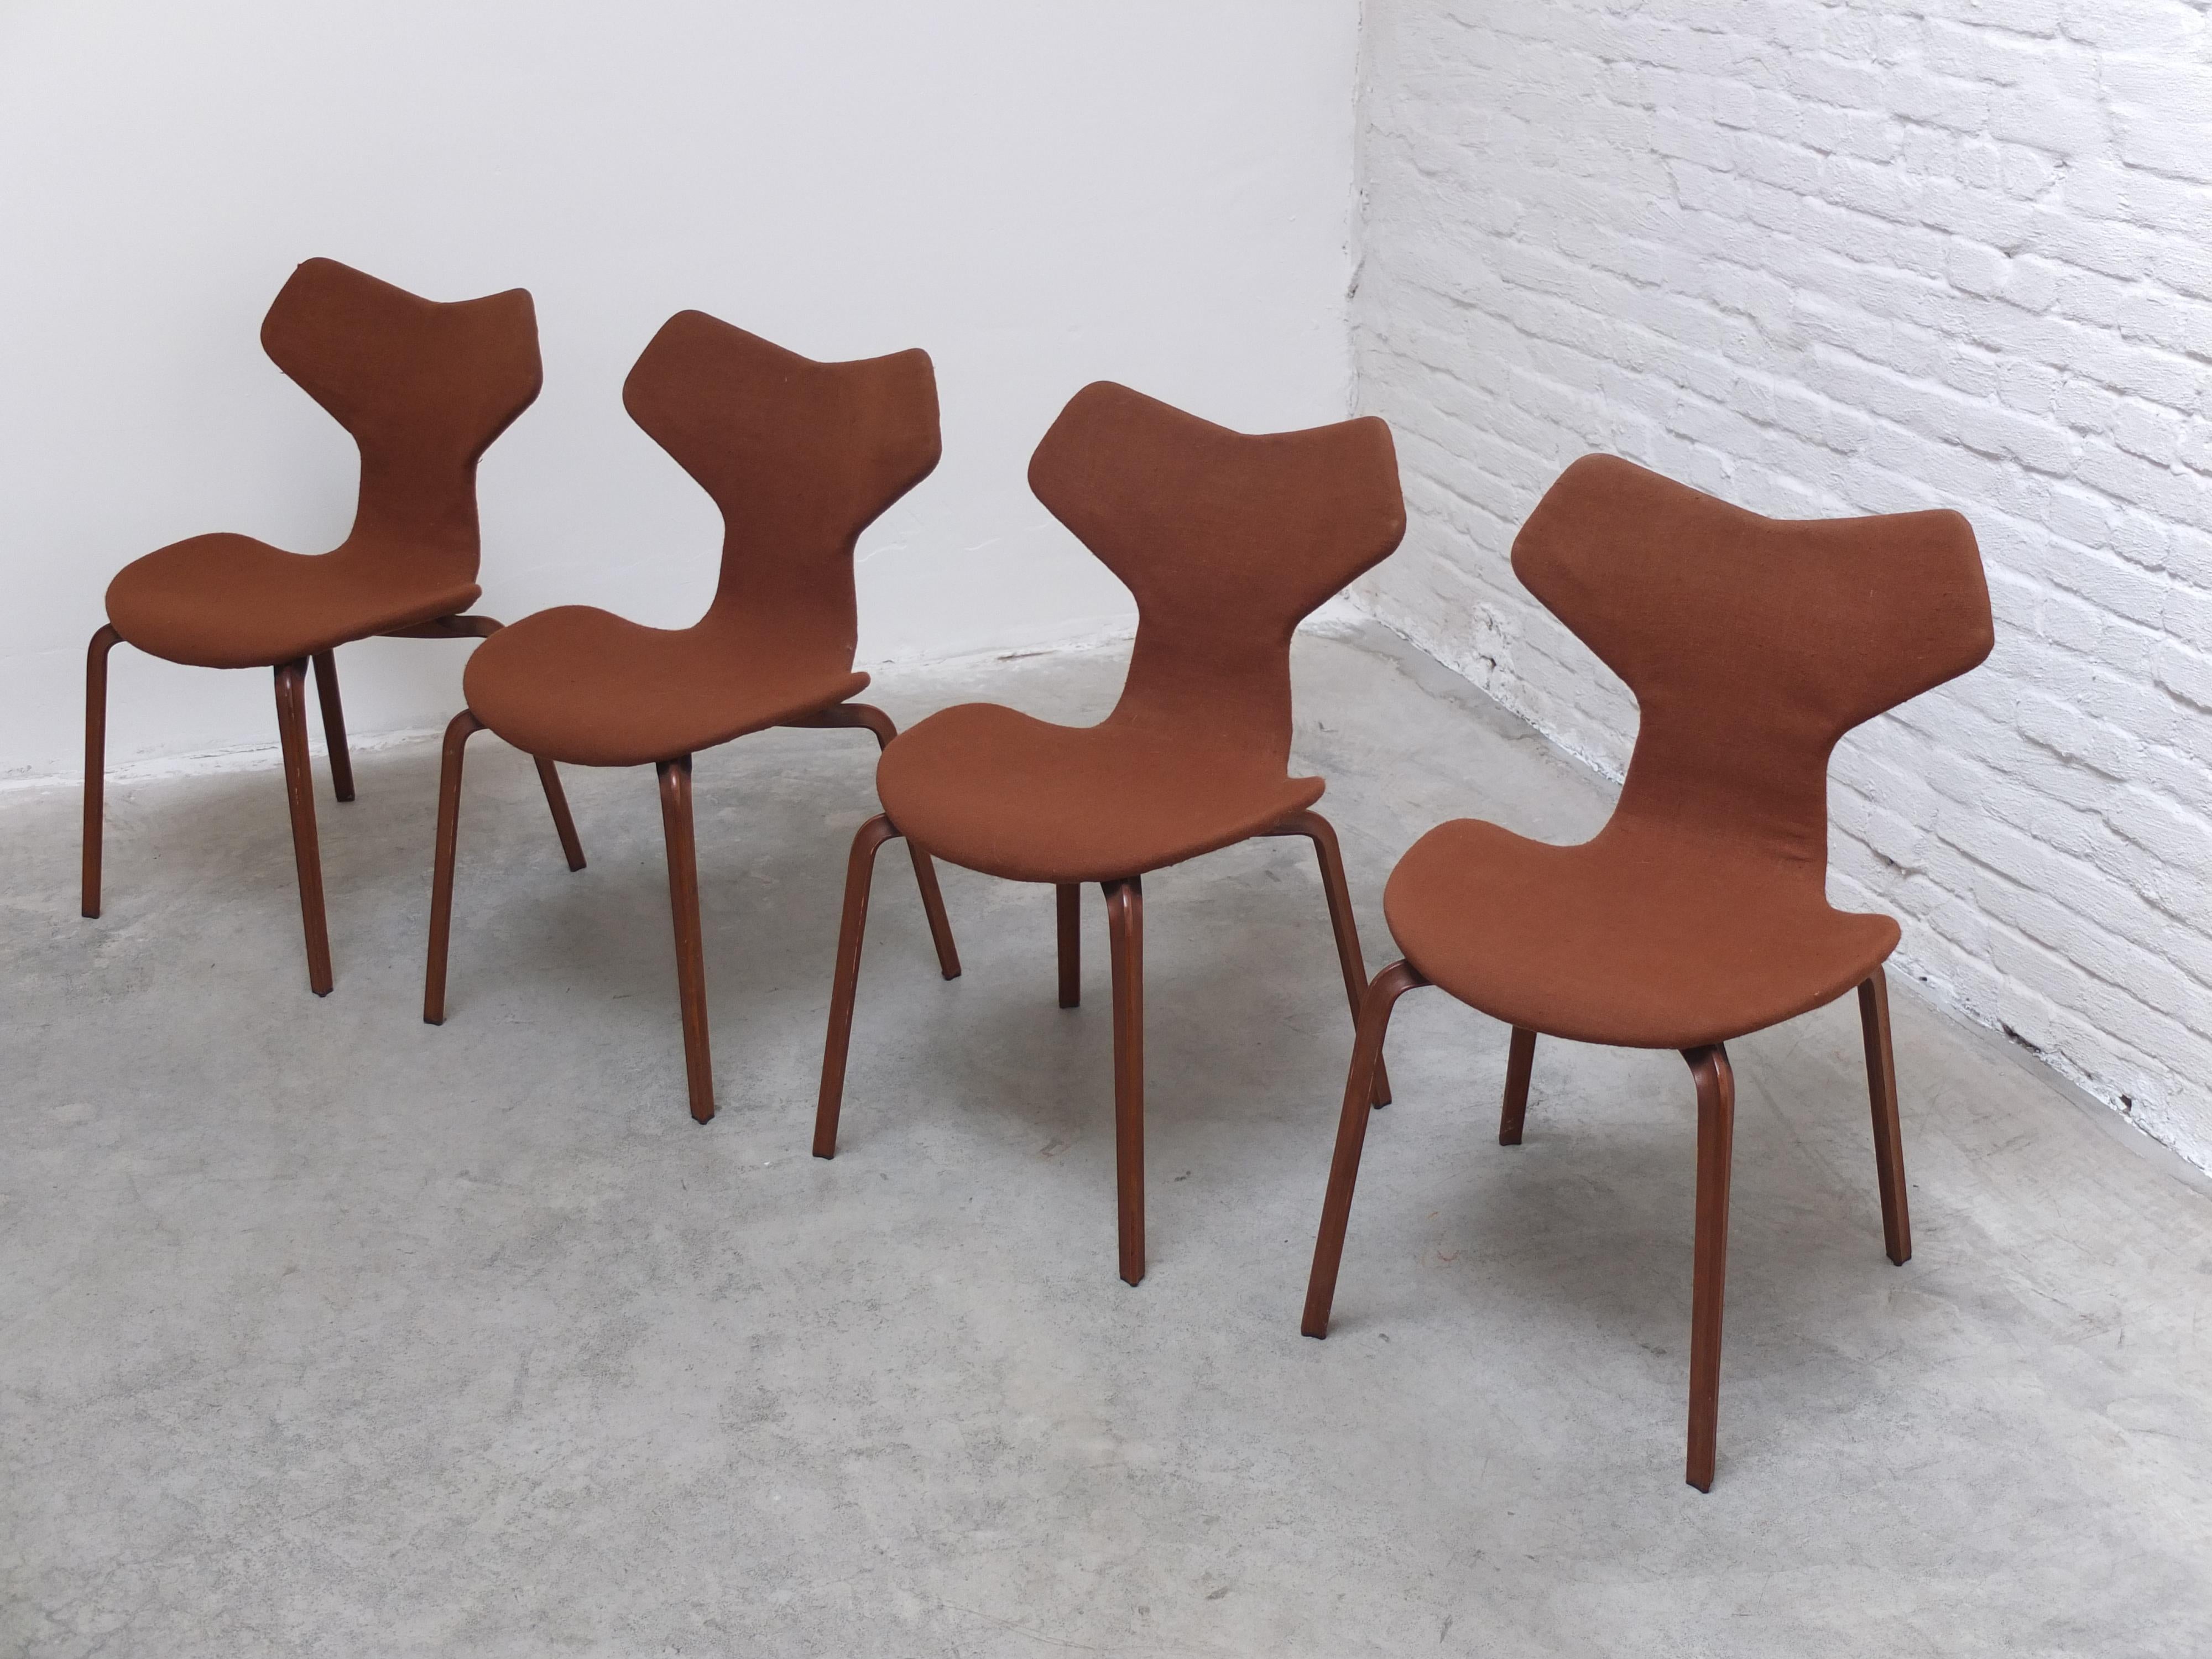 Danish Set of 4 1st Edition 'Grand Prix' Chairs by Arne Jacobsen for Fritz Hansen, 1957 For Sale